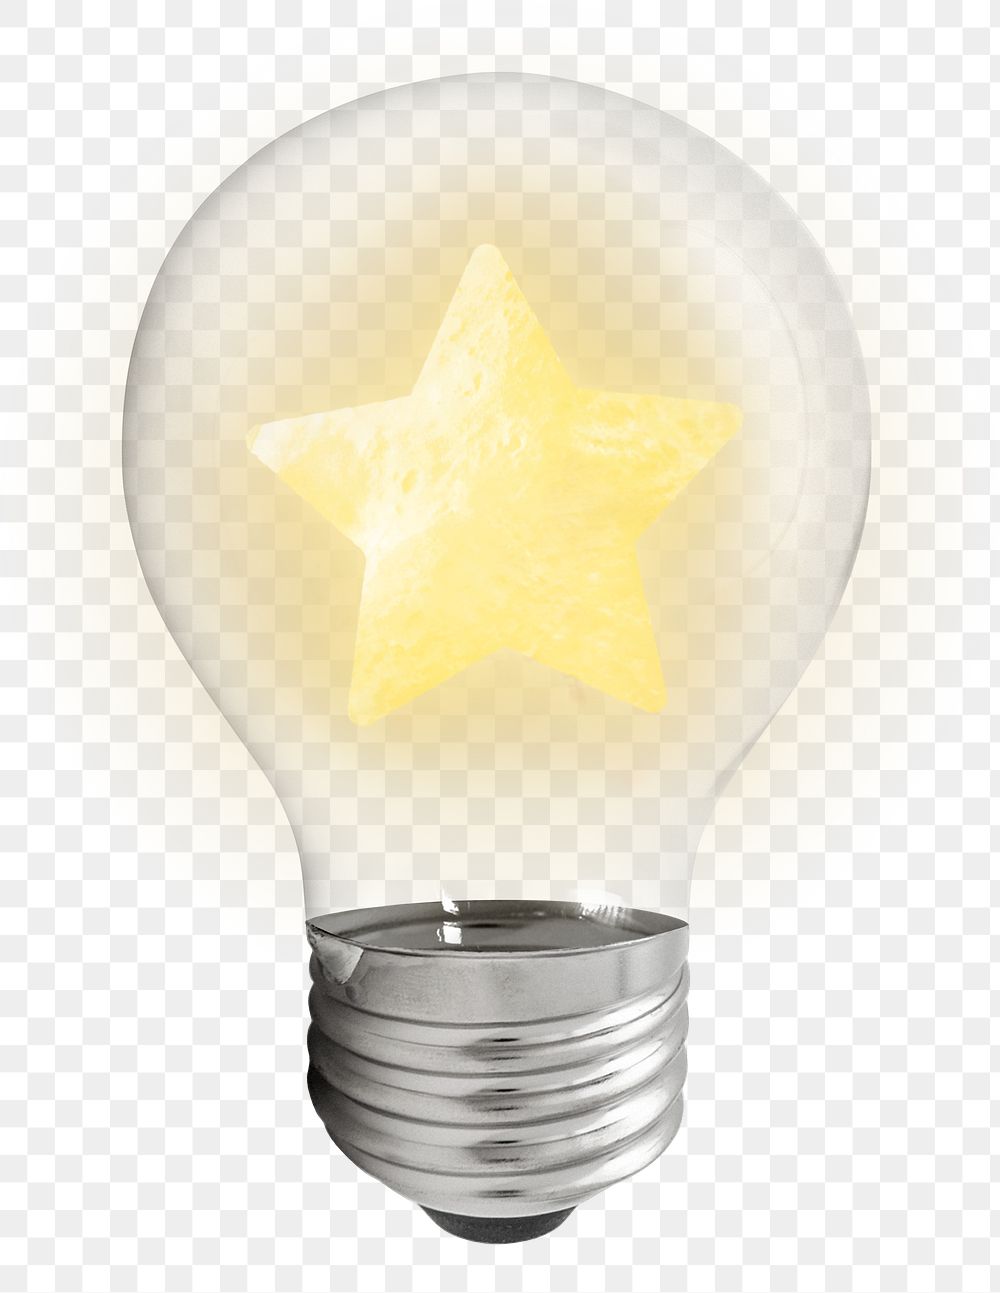 Glowing star png icon light bulb sticker, favorite symbol graphic on transparent background